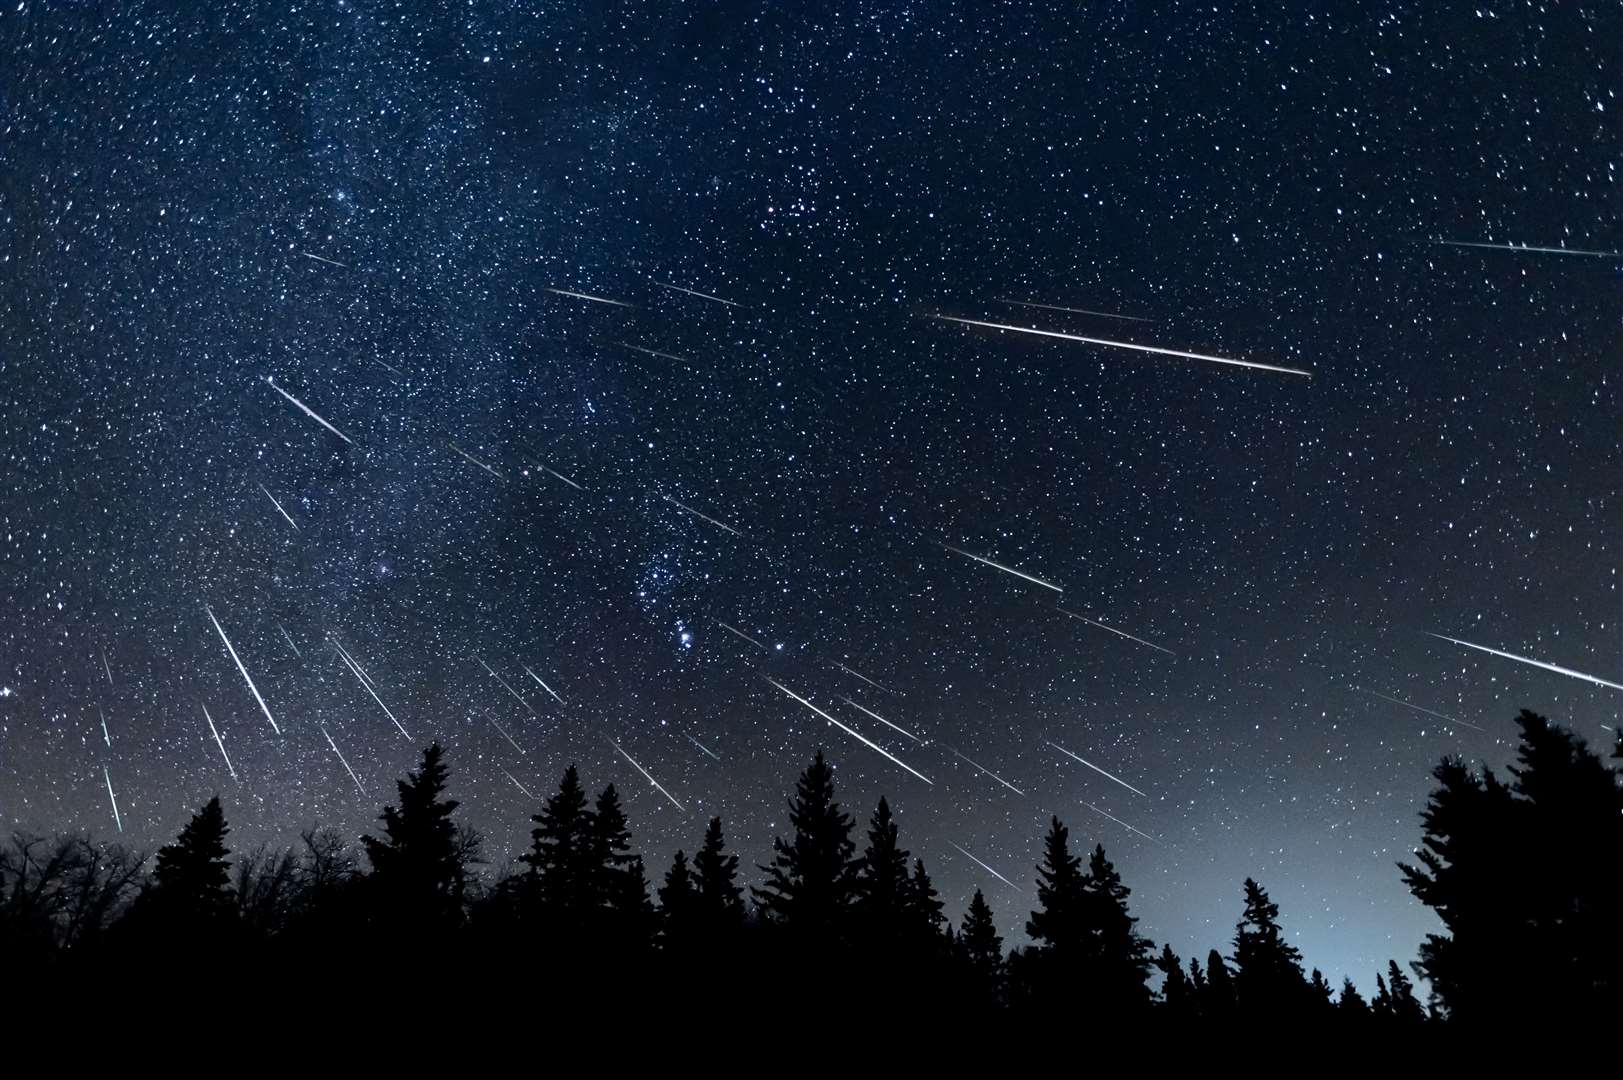 There are a number of meteor showers happening in 2022